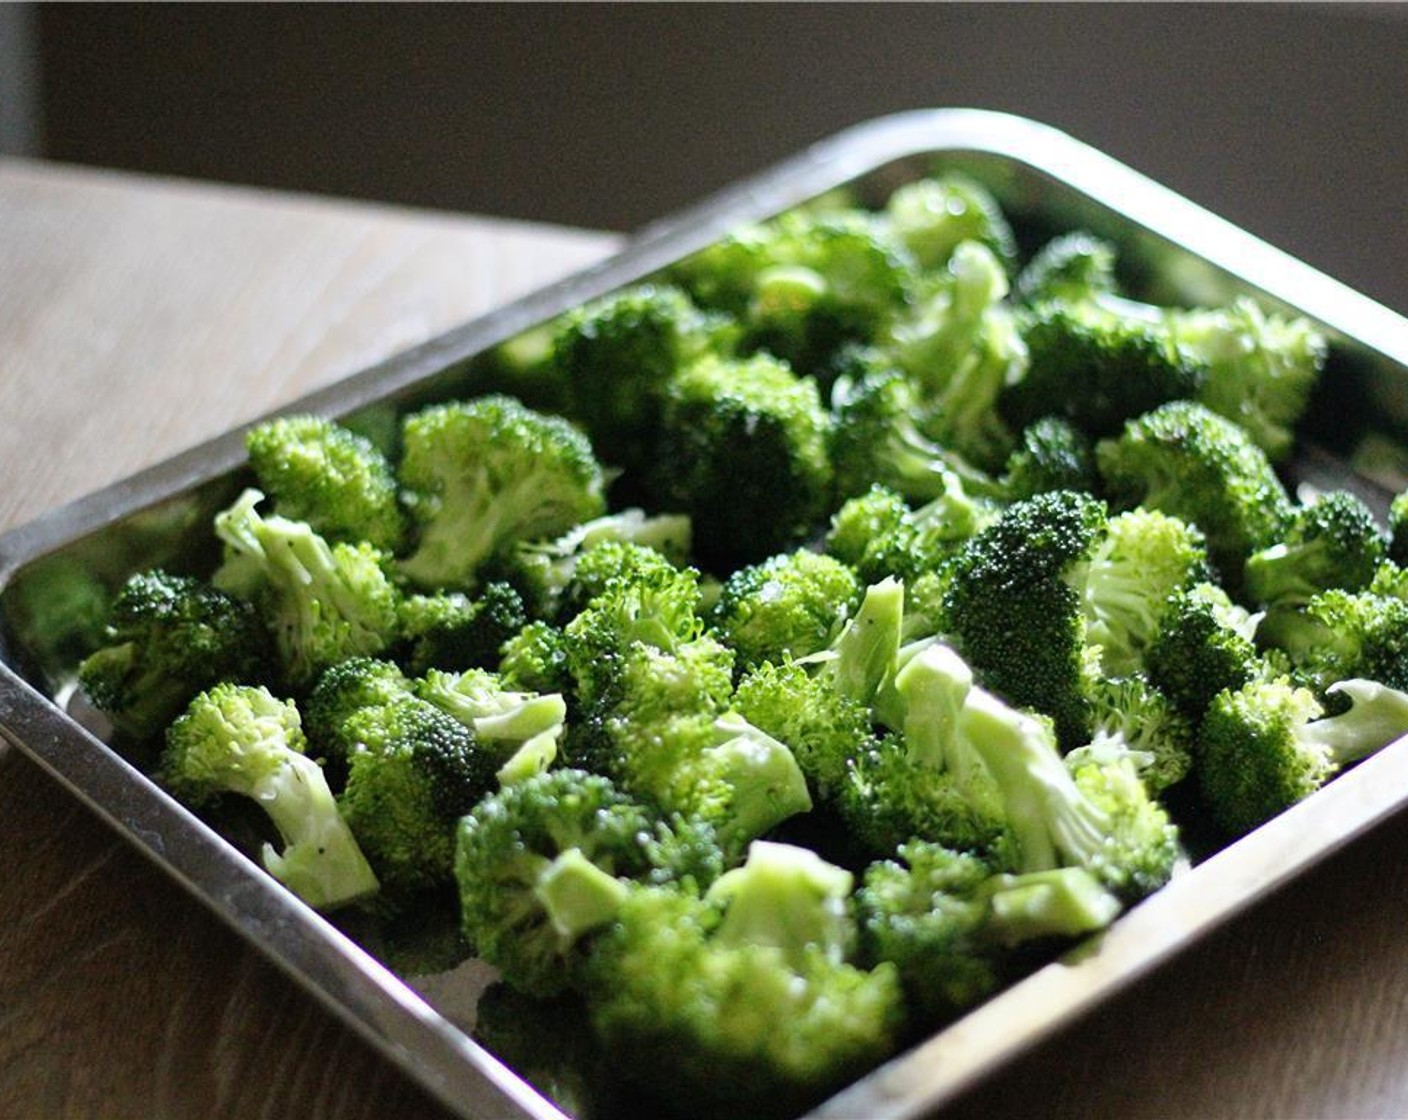 step 2 Cut Broccoli (5 cups) into spears or bite sizes pieces and place into bowl with Olive Oil (2 Tbsp), Garlic (2 cloves), Salt (to taste) and Black Pepper ( to taste) toss ingredients together to coat broccoli, Balsamic Vinegar (1/2 cup) and Fresh Thyme (1/2 Tbsp) set aside.